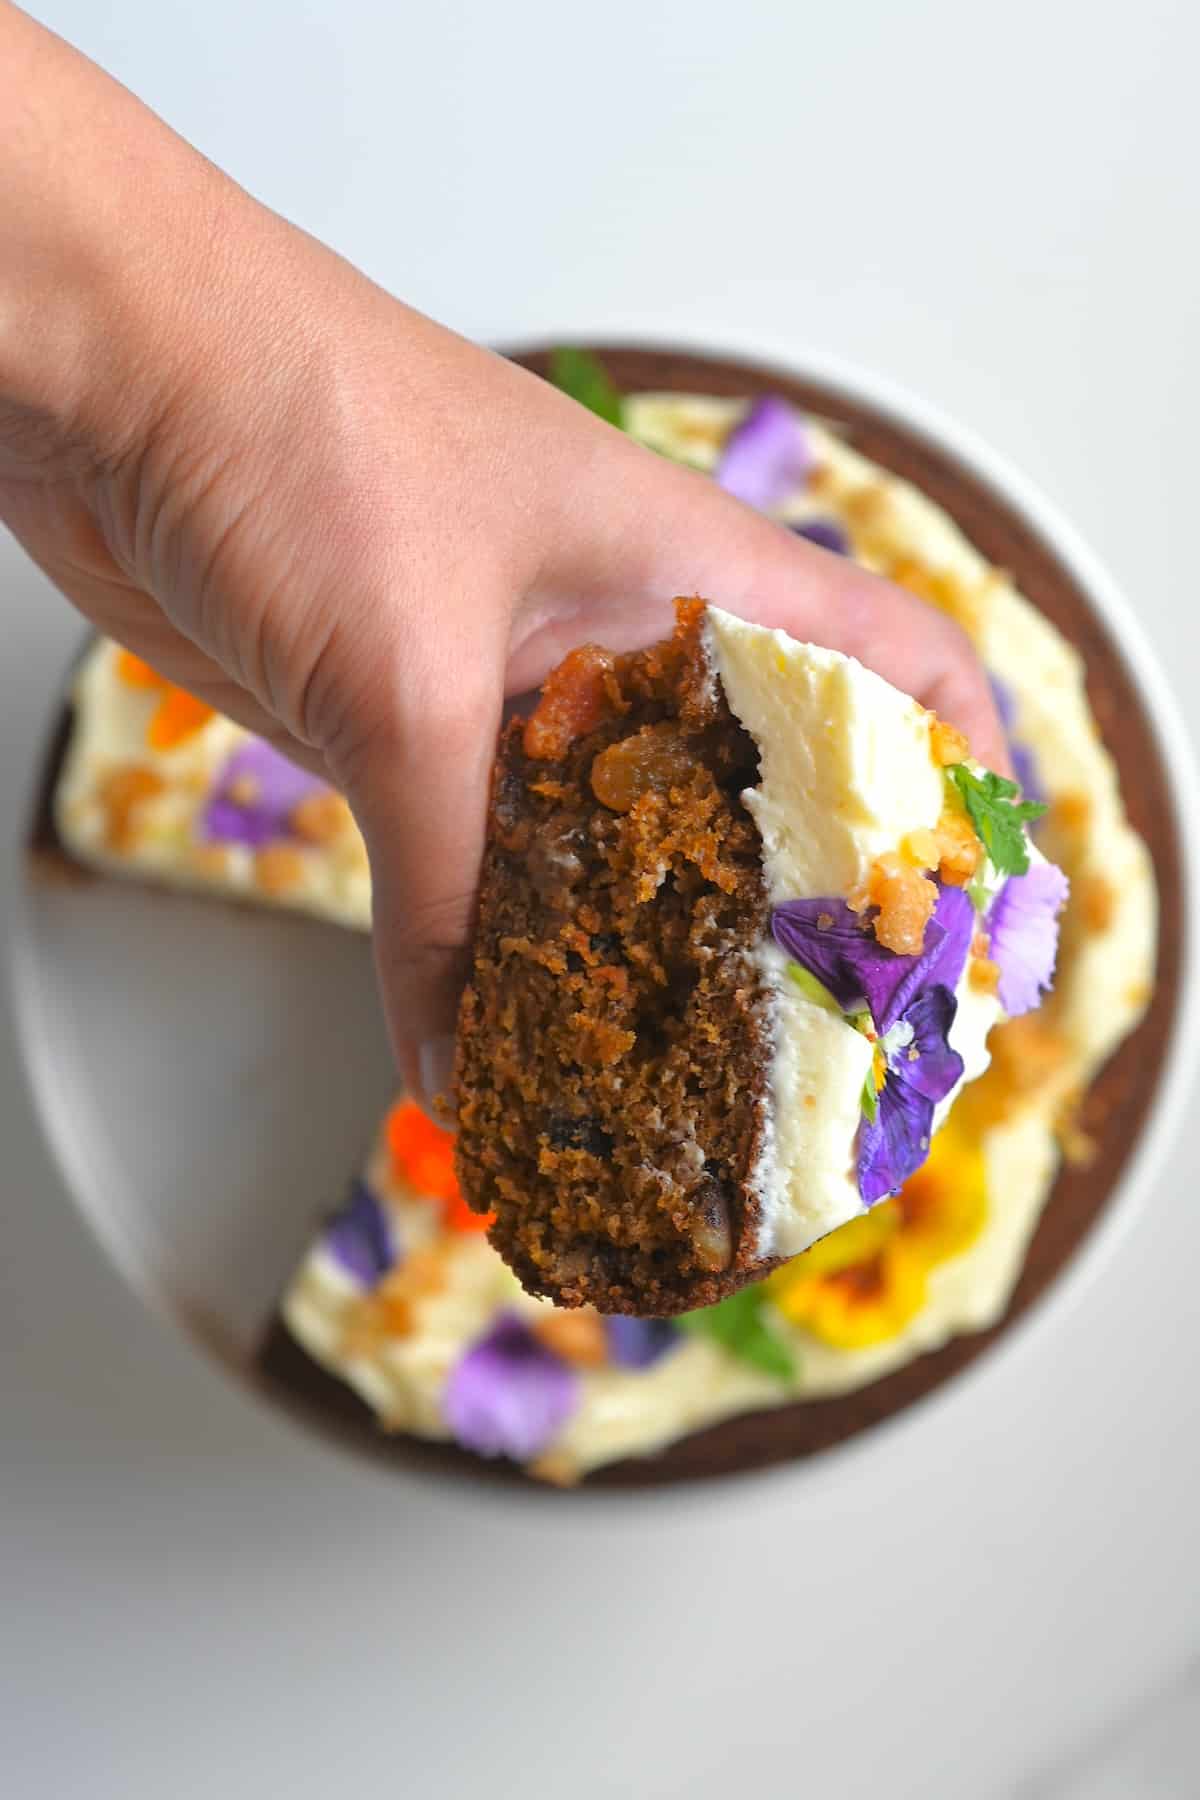 A close up of a slice of carrot cake with frosting